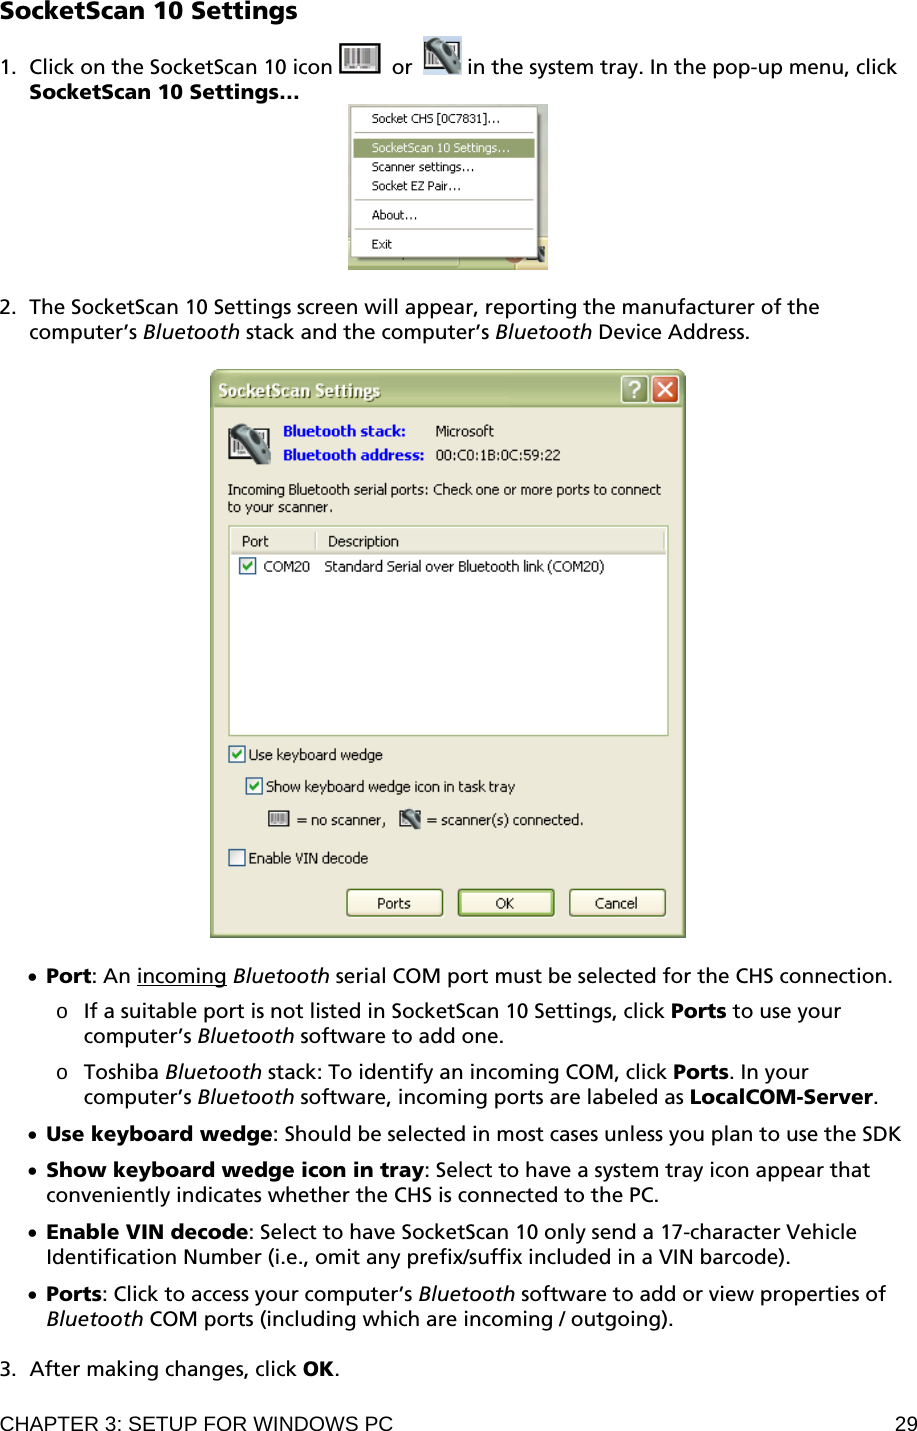 CHAPTER 3: SETUP FOR WINDOWS PC  29 SocketScan 10 Settings  1. Click on the SocketScan 10 icon    or   in the system tray. In the pop-up menu, click SocketScan 10 Settings…   2. The SocketScan 10 Settings screen will appear, reporting the manufacturer of the computer’s Bluetooth stack and the computer’s Bluetooth Device Address.    • Port: An incoming Bluetooth serial COM port must be selected for the CHS connection.   o If a suitable port is not listed in SocketScan 10 Settings, click Ports to use your computer’s Bluetooth software to add one.  o Toshiba Bluetooth stack: To identify an incoming COM, click Ports. In your computer’s Bluetooth software, incoming ports are labeled as LocalCOM-Server.  • Use keyboard wedge: Should be selected in most cases unless you plan to use the SDK  • Show keyboard wedge icon in tray: Select to have a system tray icon appear that conveniently indicates whether the CHS is connected to the PC.  • Enable VIN decode: Select to have SocketScan 10 only send a 17-character Vehicle Identification Number (i.e., omit any prefix/suffix included in a VIN barcode).  • Ports: Click to access your computer’s Bluetooth software to add or view properties of Bluetooth COM ports (including which are incoming / outgoing).  3. After making changes, click OK. 